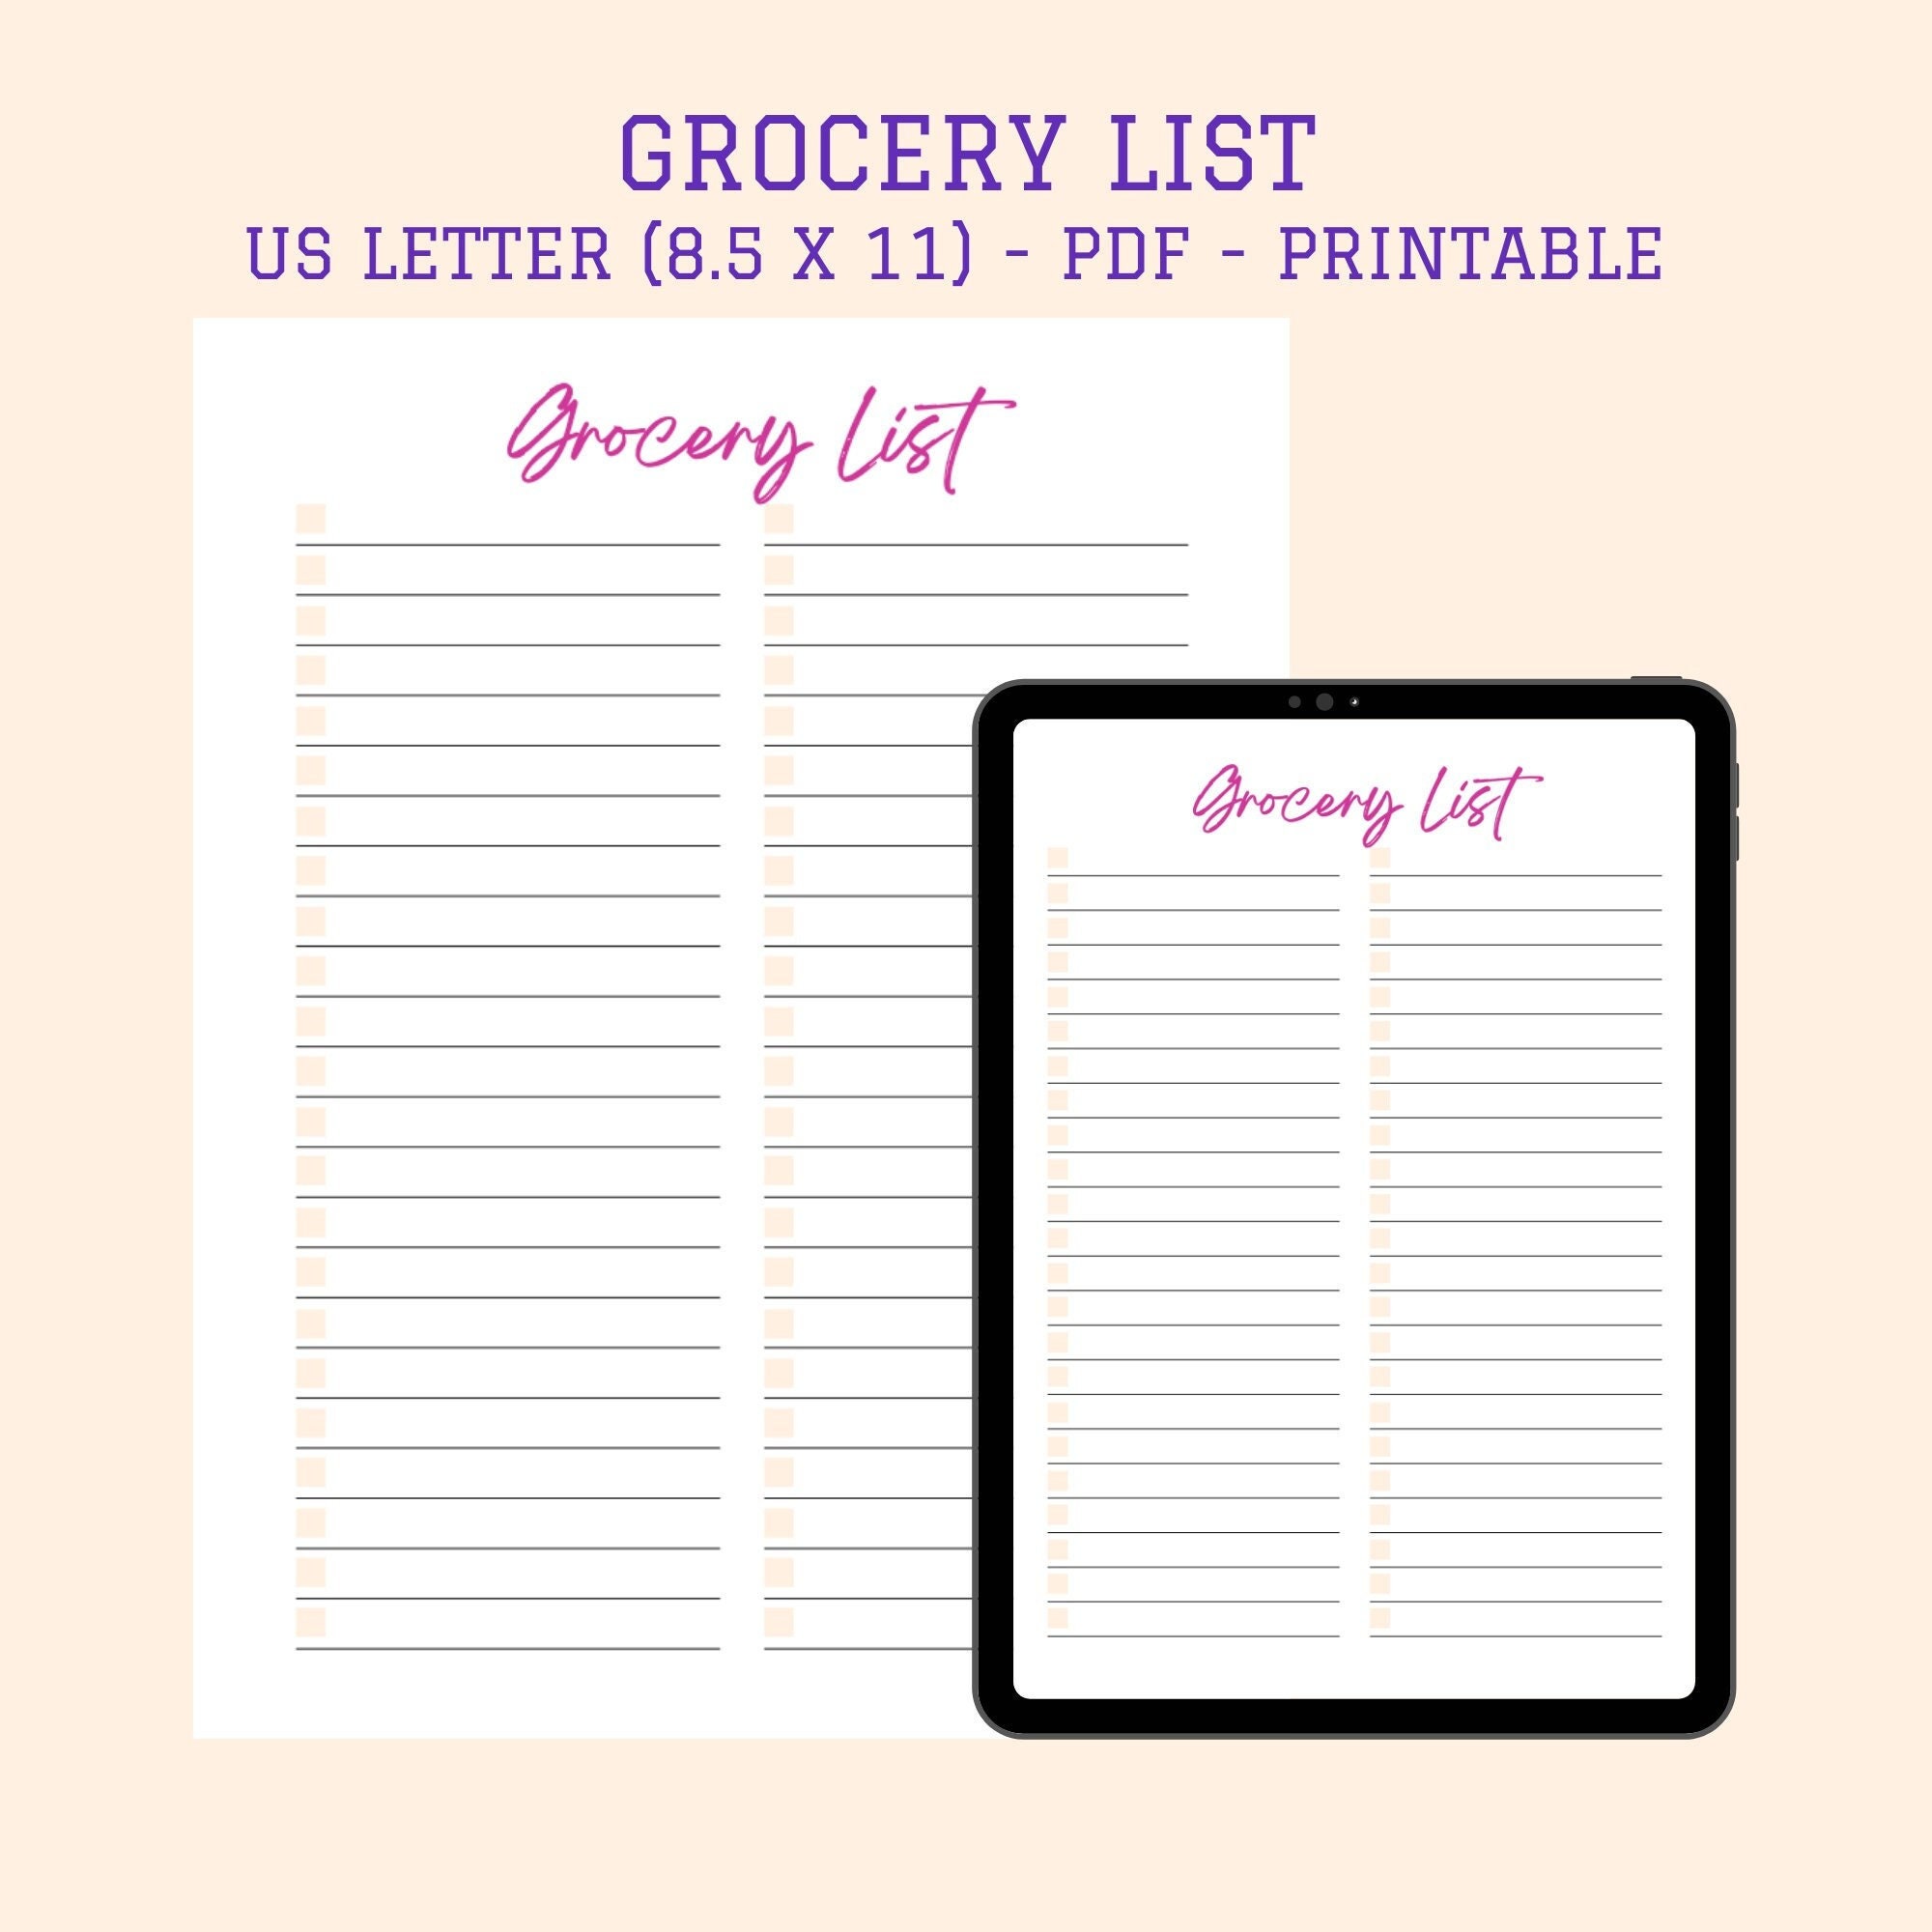 Grocery List Printable Grocery List Template Grocery List - Etsy